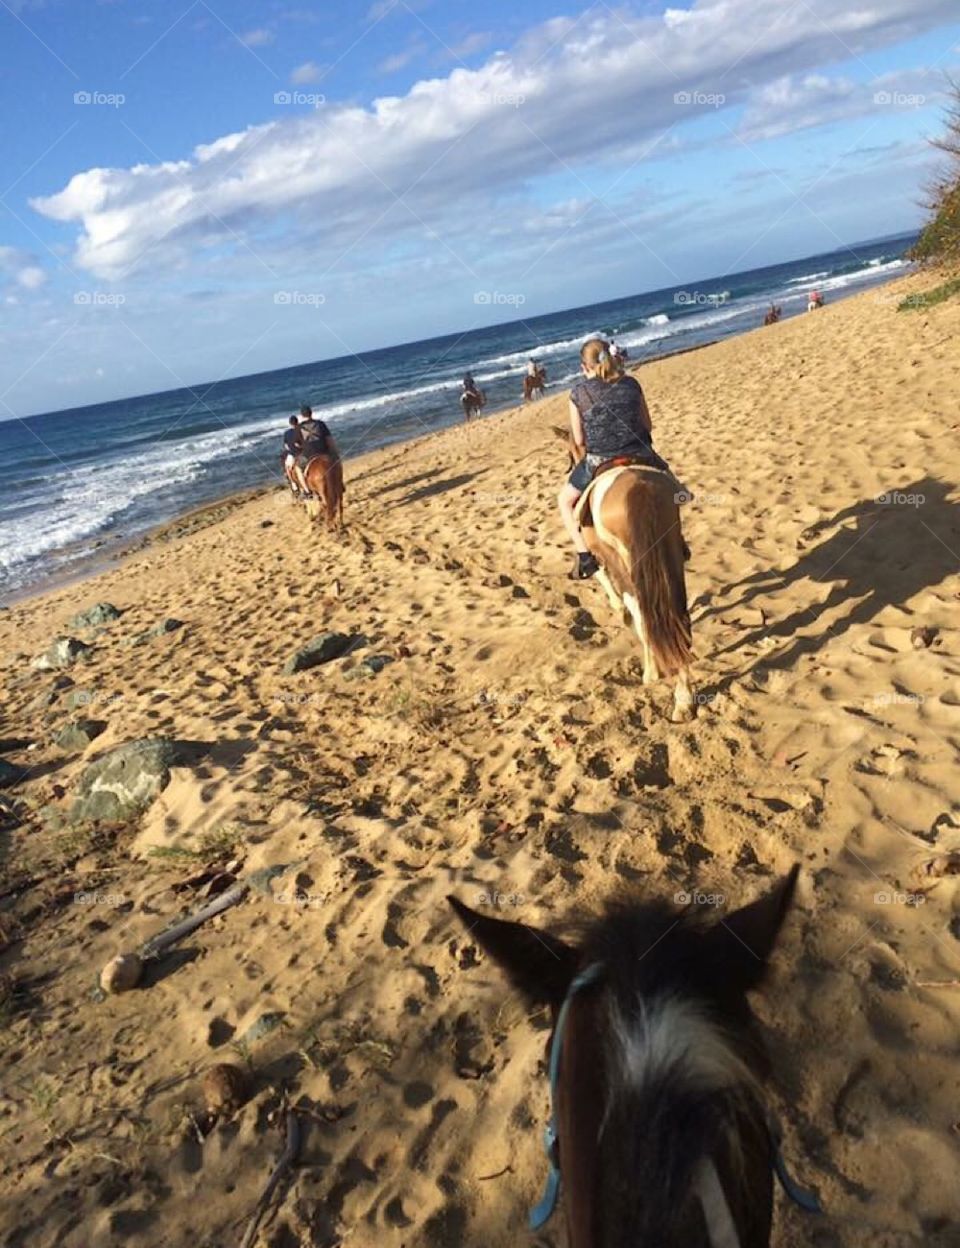 View from the back. Horseback riding on the beach in Rincon, Puerto Rico. 